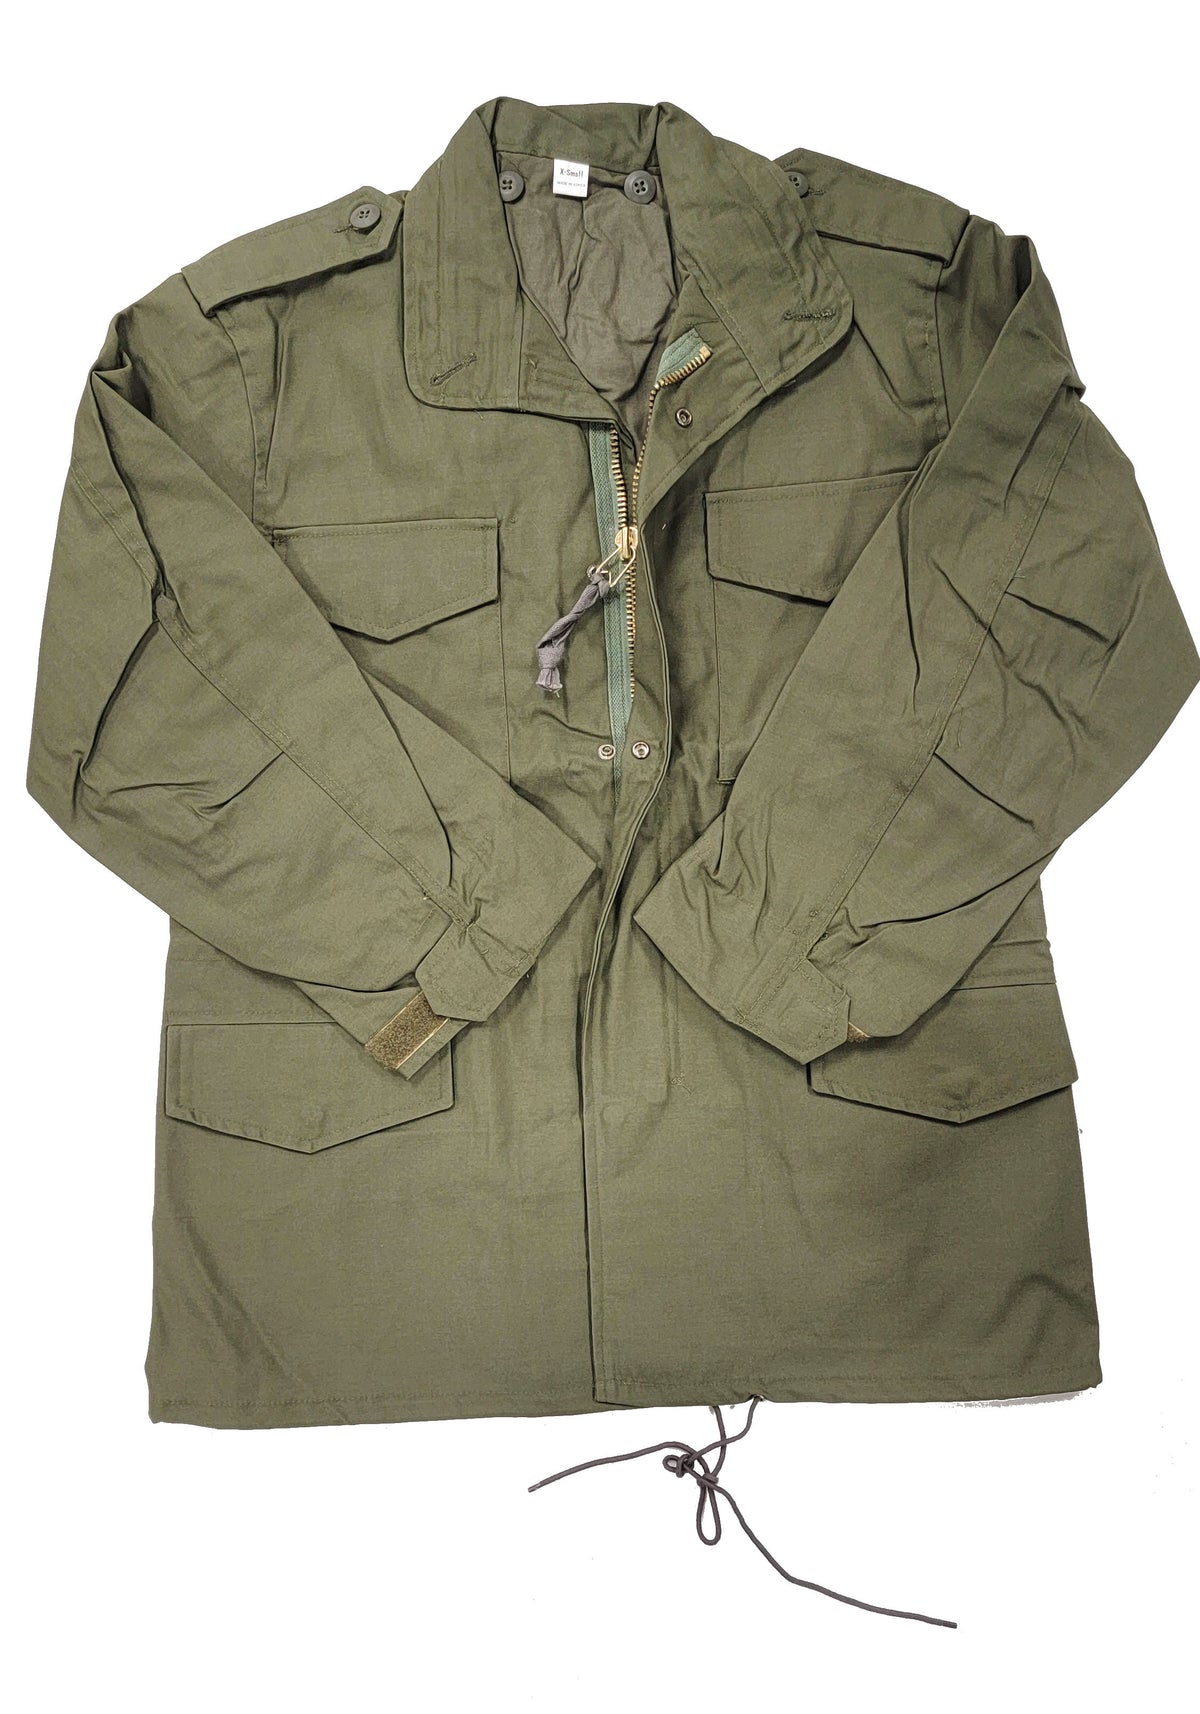 CLEARANCE Vintage M52 Field Jacket Replica - Size X-Small